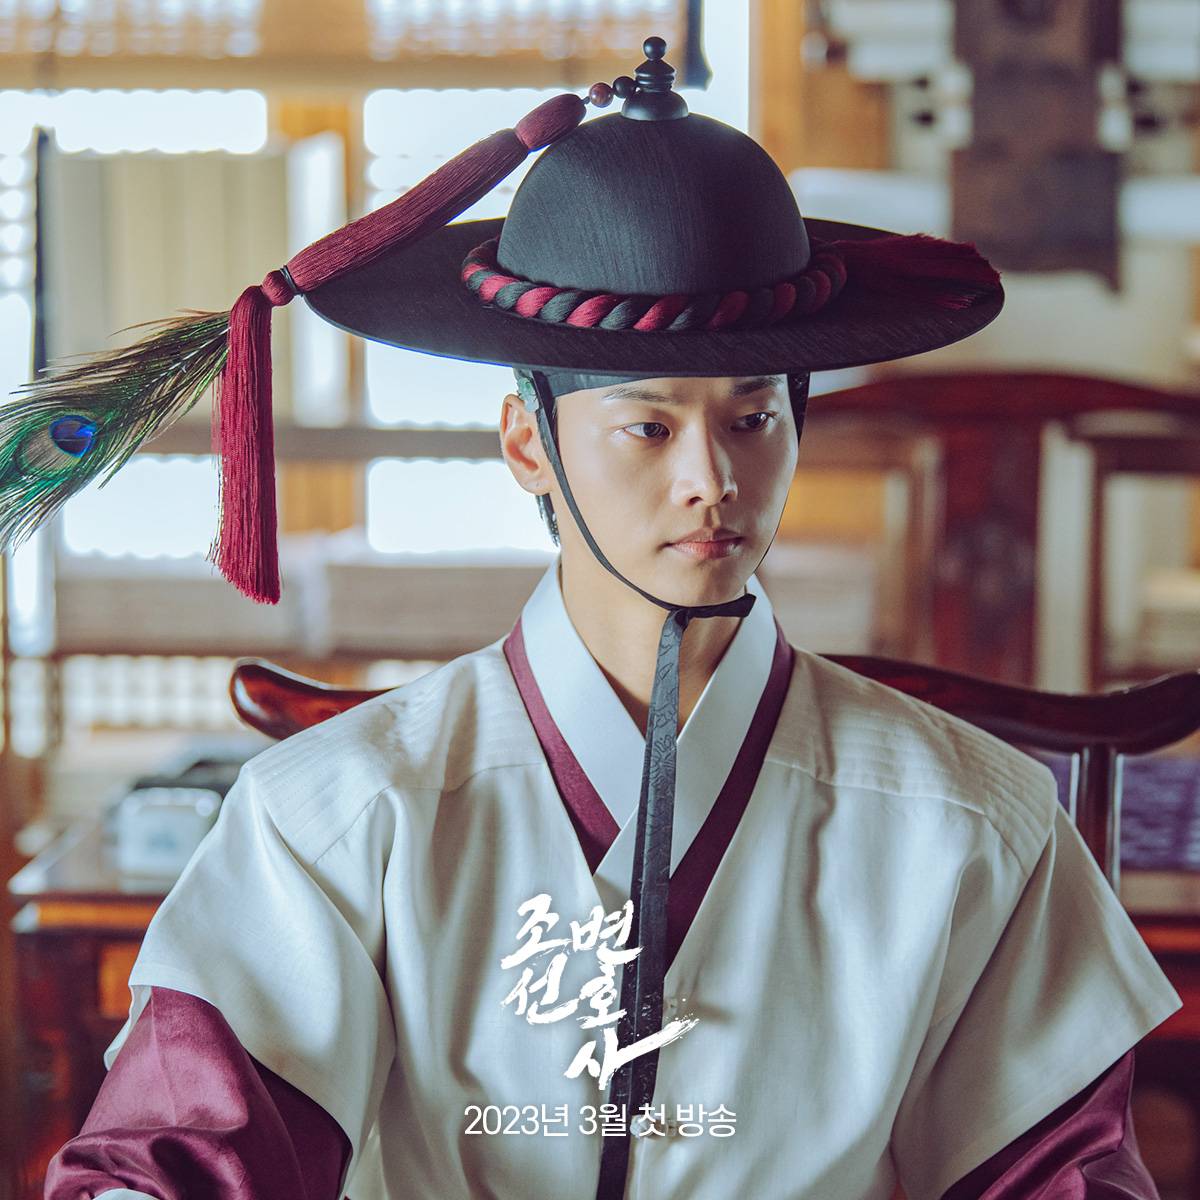 [Photos] New Stills Added for the Upcoming Korean Drama 'Joseon Lawyer ...